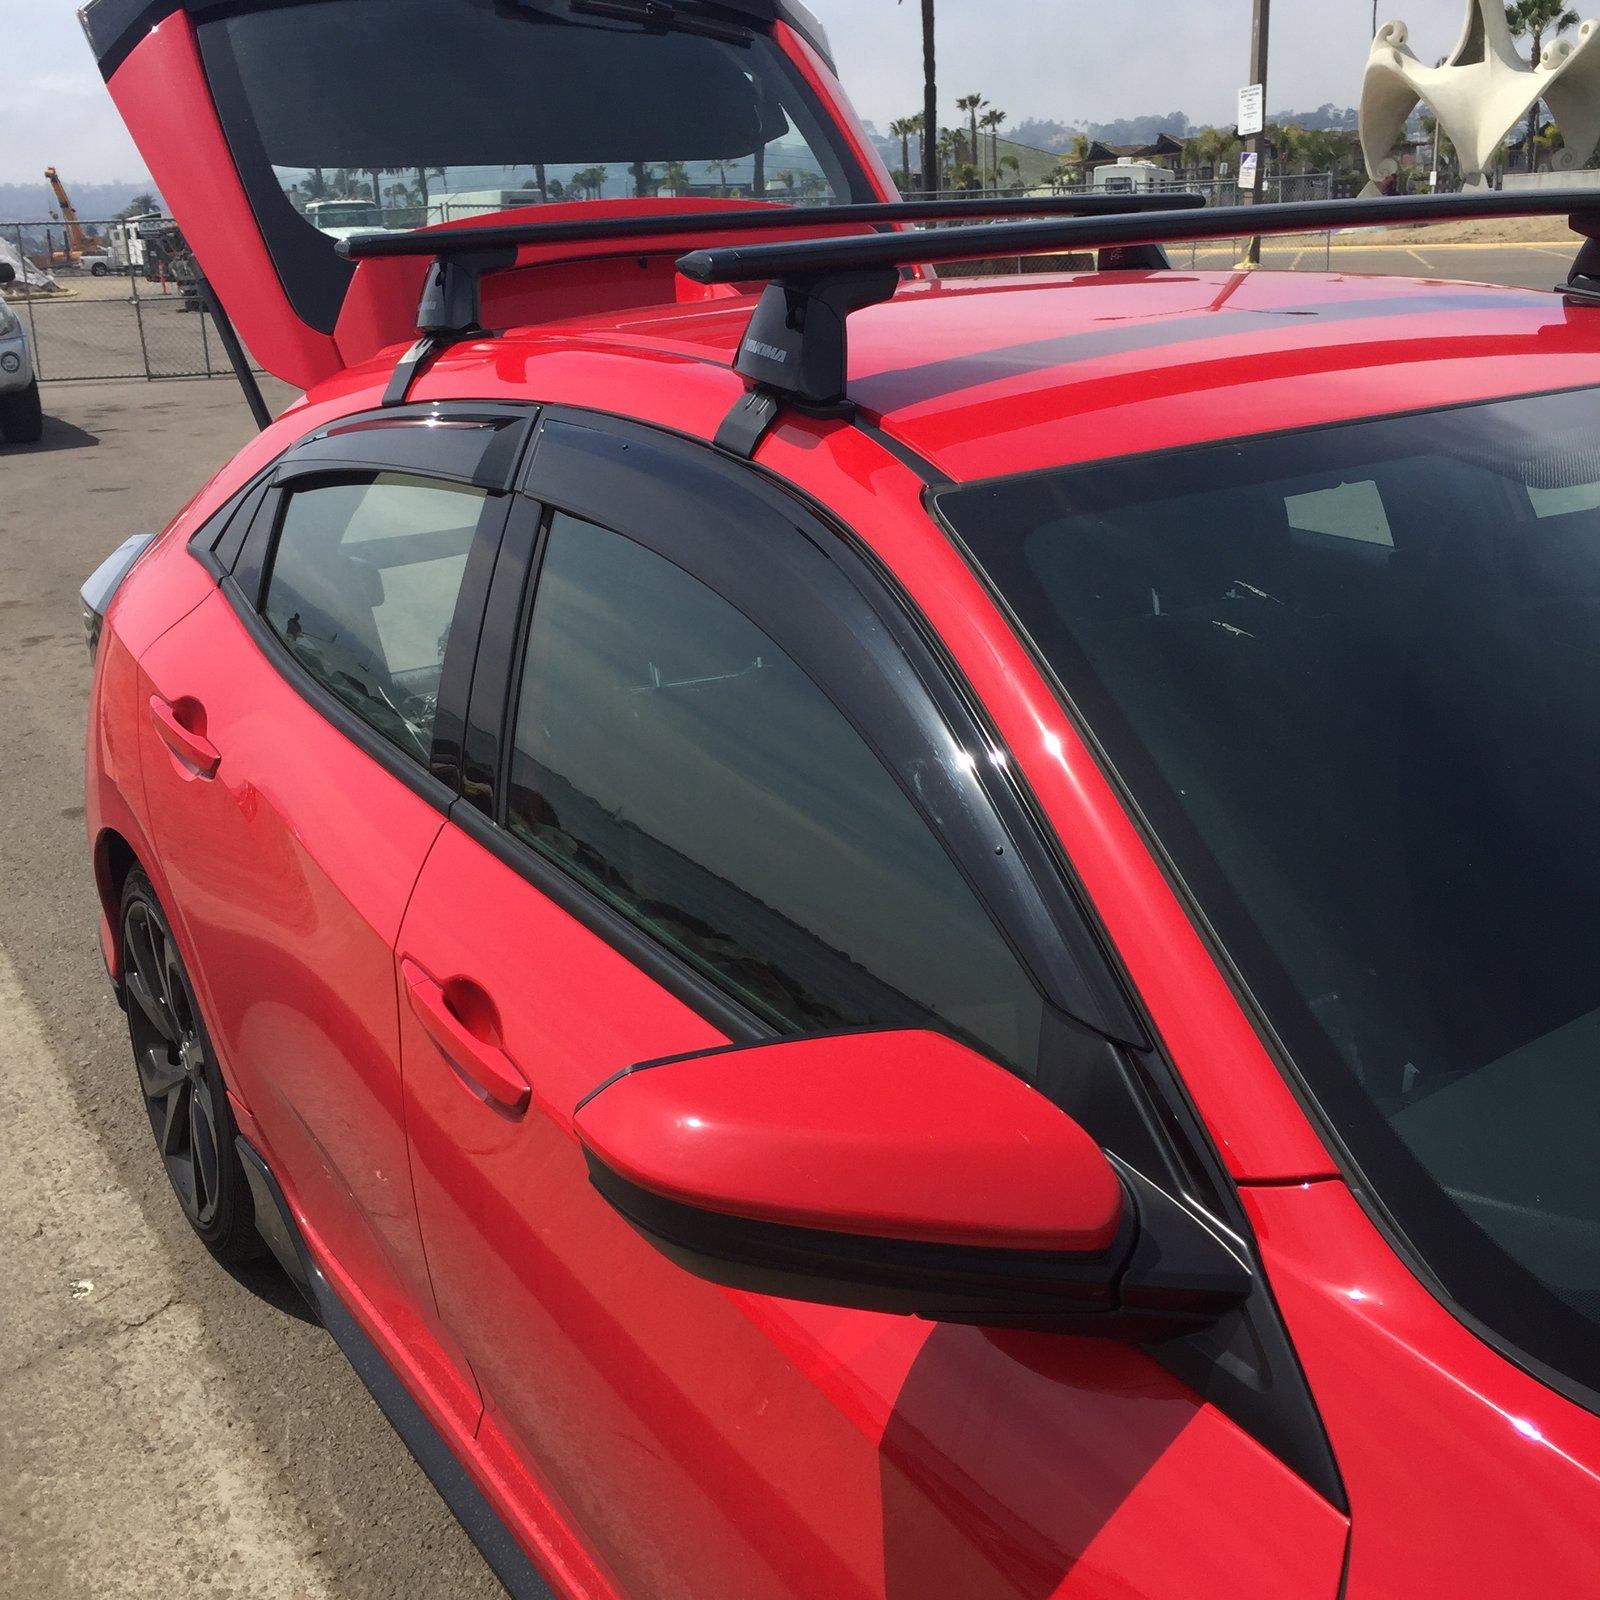 Any hatchback owners get a roof rack yet? Page 2 2016+ Honda Civic Forum (10th Gen) Type R